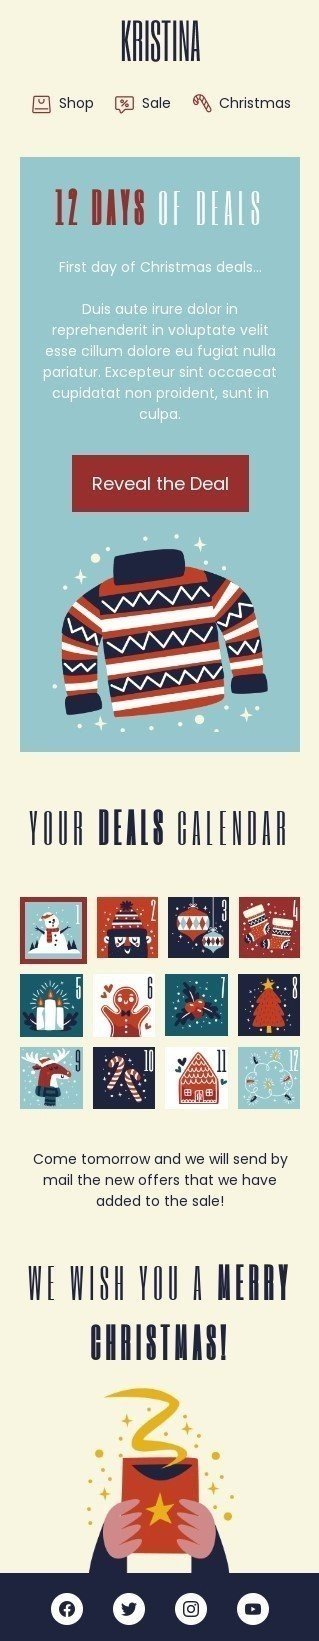 Christmas email template "12 days of deals" for fashion industry mobile view